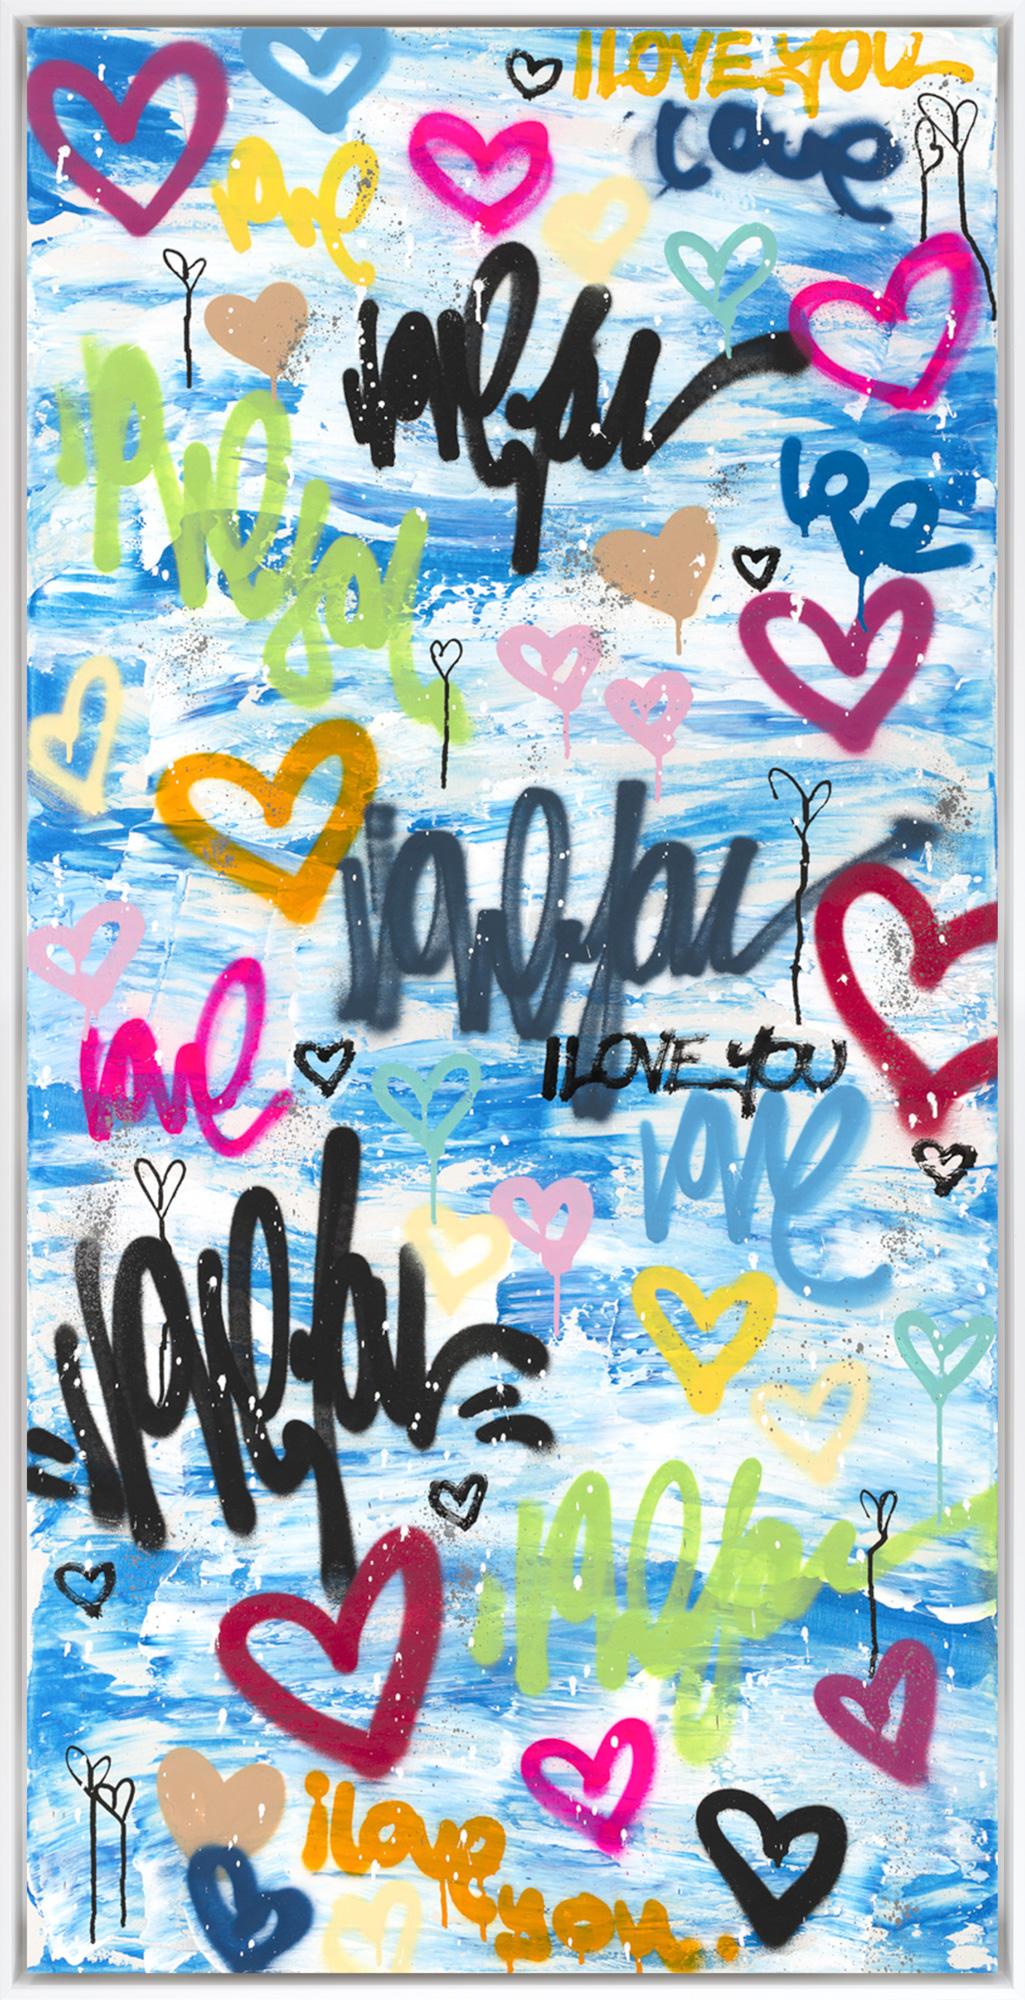 "Ideal Love Match" Contemporary Mixed Media Graffiti on Canvas Framed  - Mixed Media Art by Amber Goldhammer